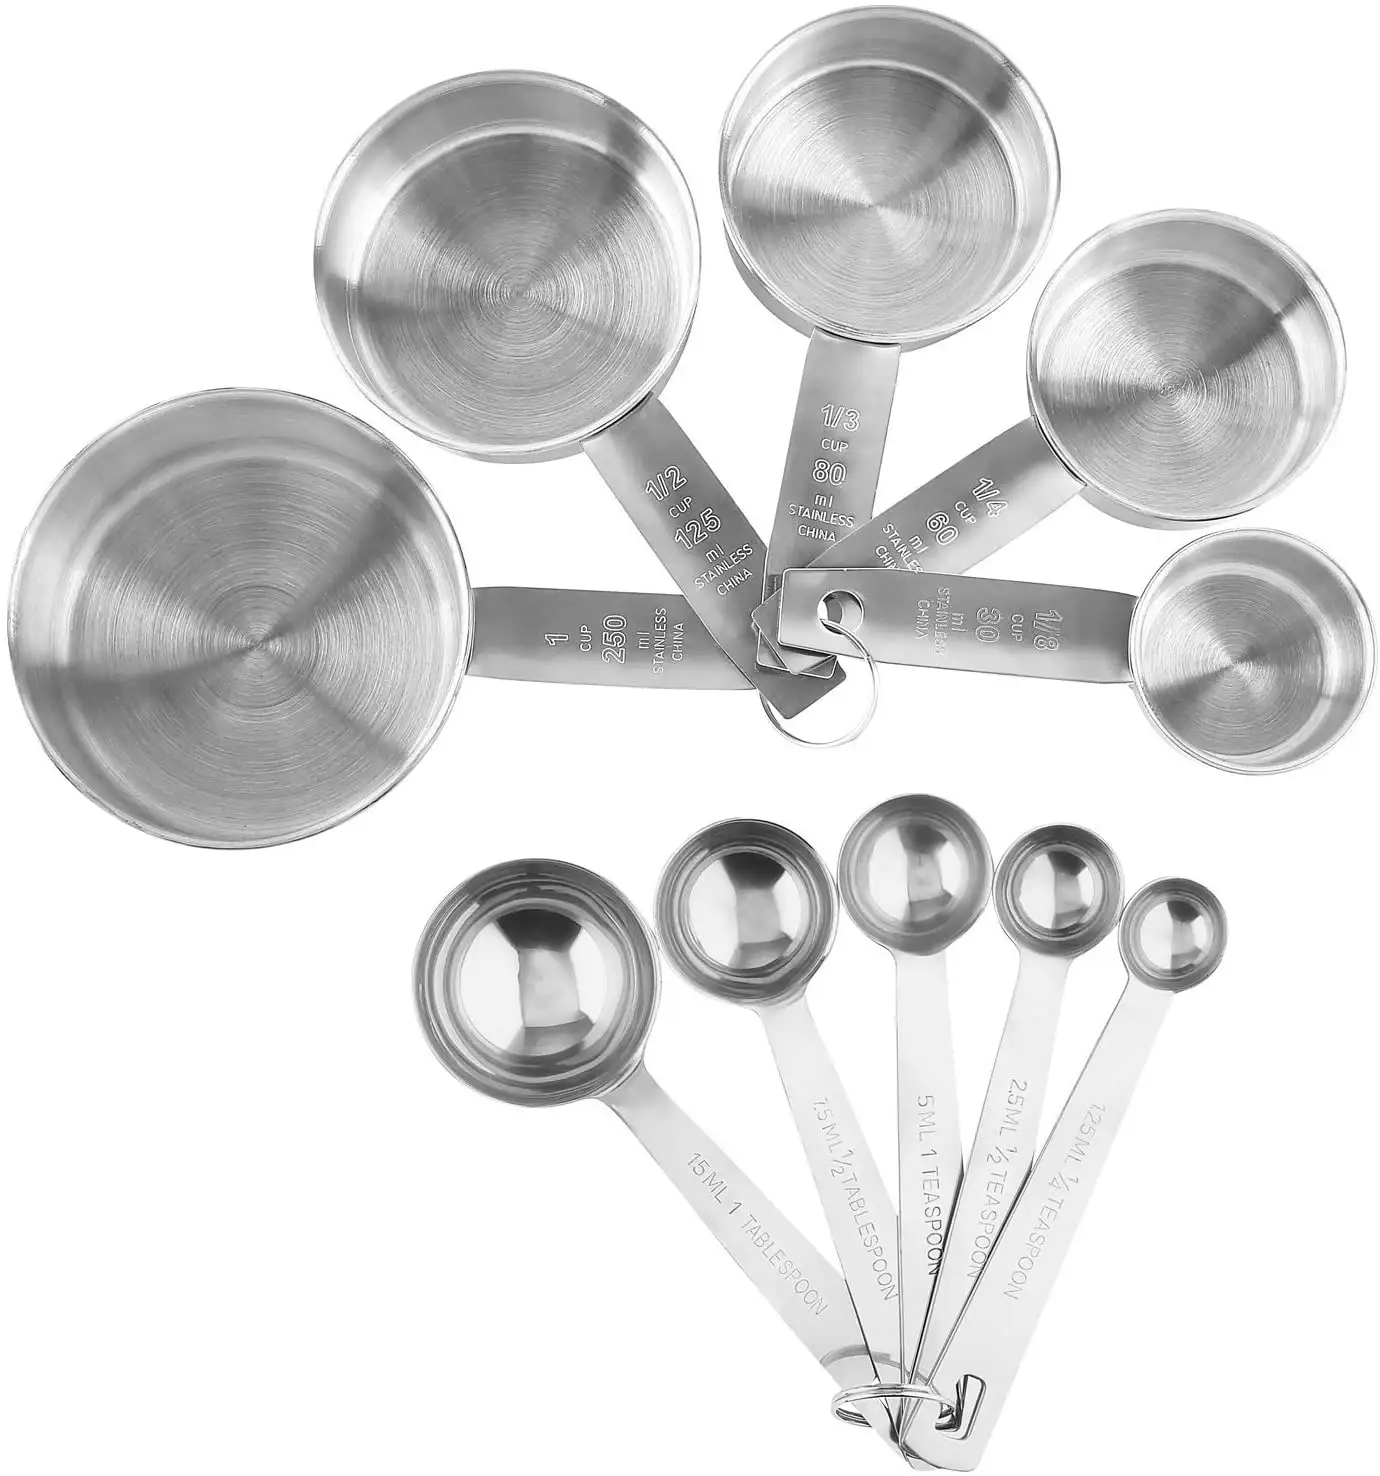 10-Piece Set Stainless Steel Measuring Cups And Measuring Spoons , 5 Cups And 5 Spoons